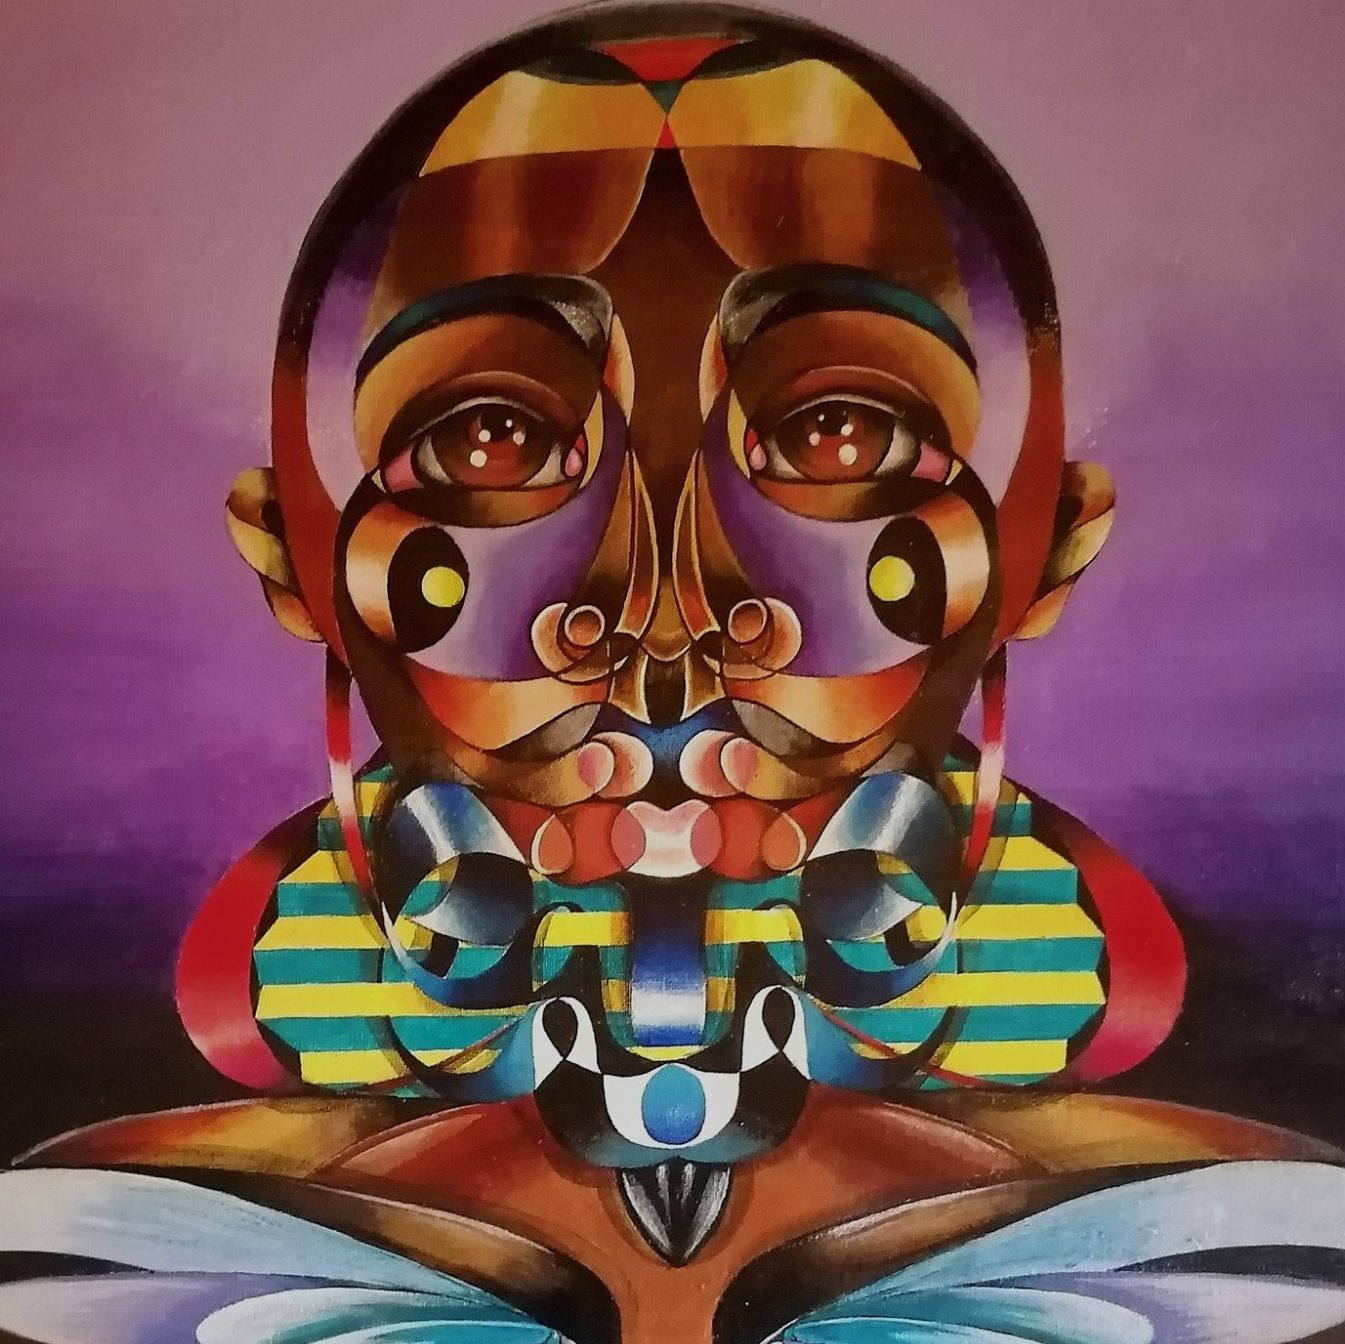 A colorful, surreal painting of a stylized face with geometric and organic shapes, and a butterfly motif at the base.